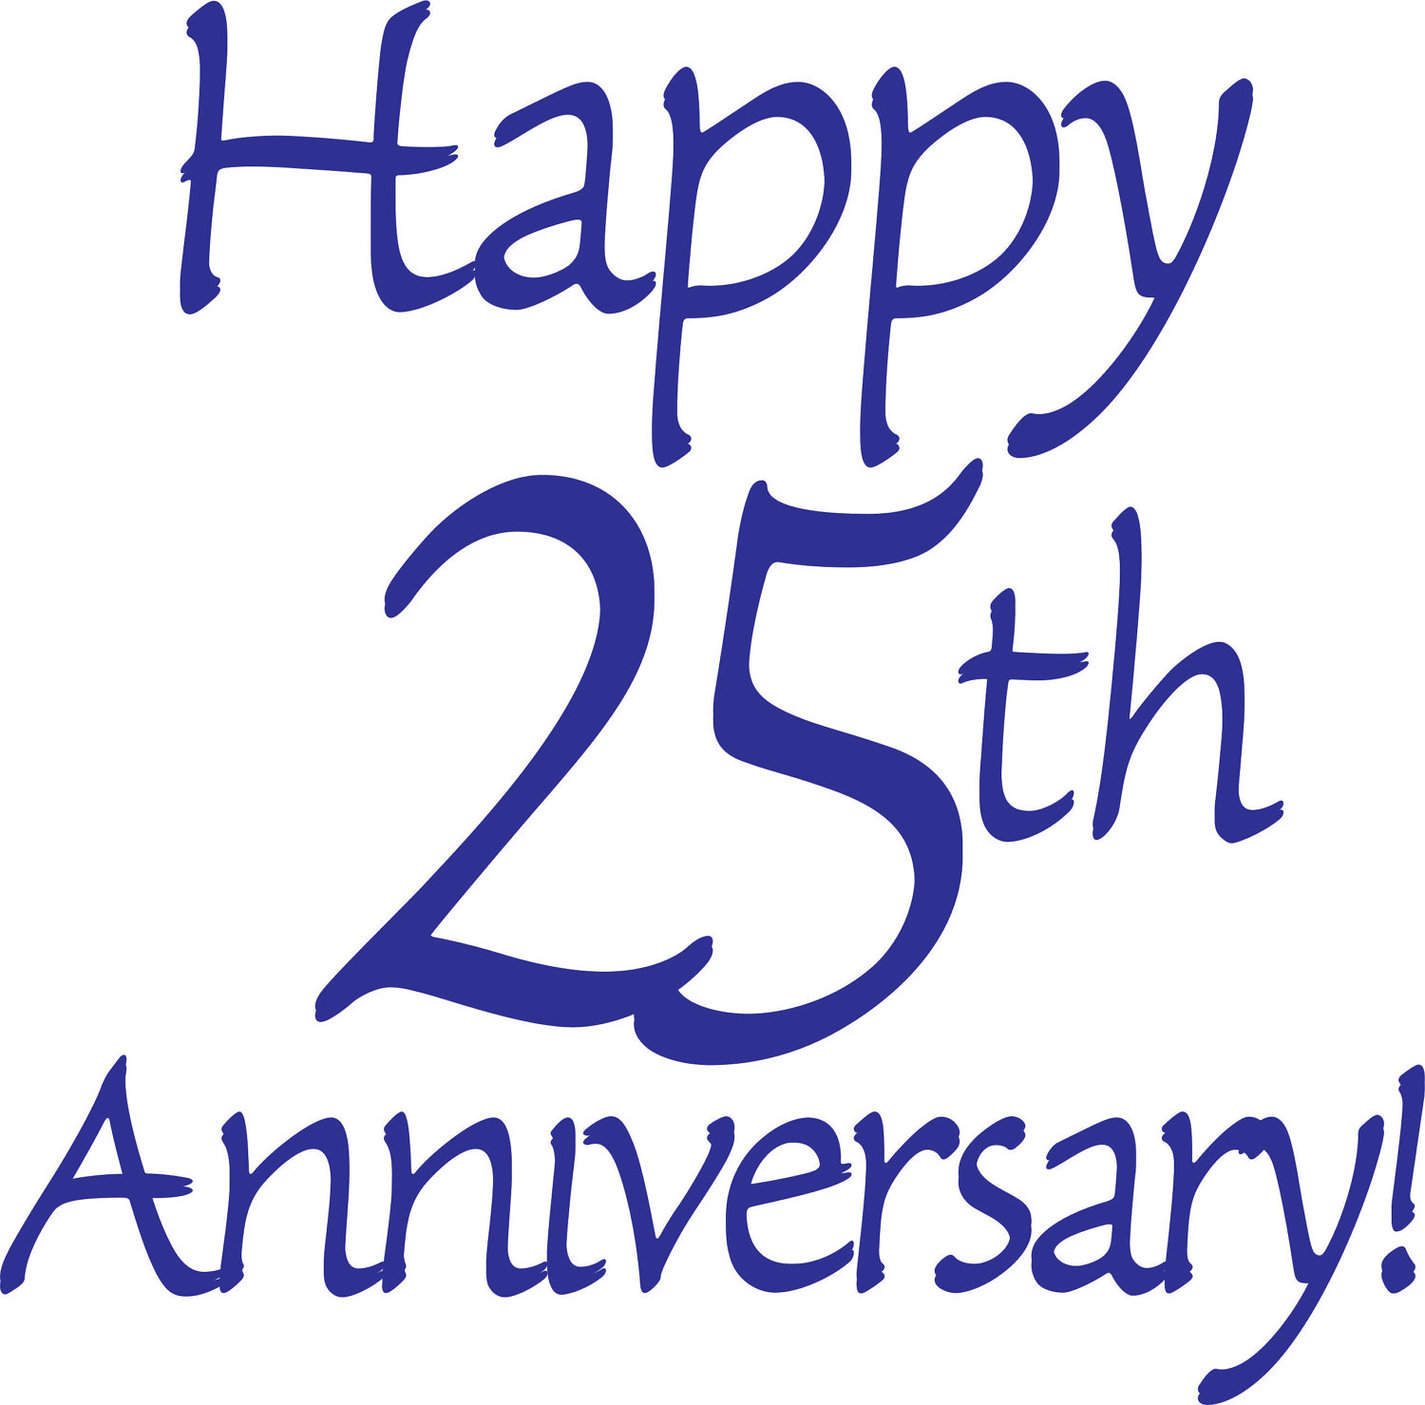 25th Anniversary Clip Art Free Clipart - Free to use Clip Art Resource